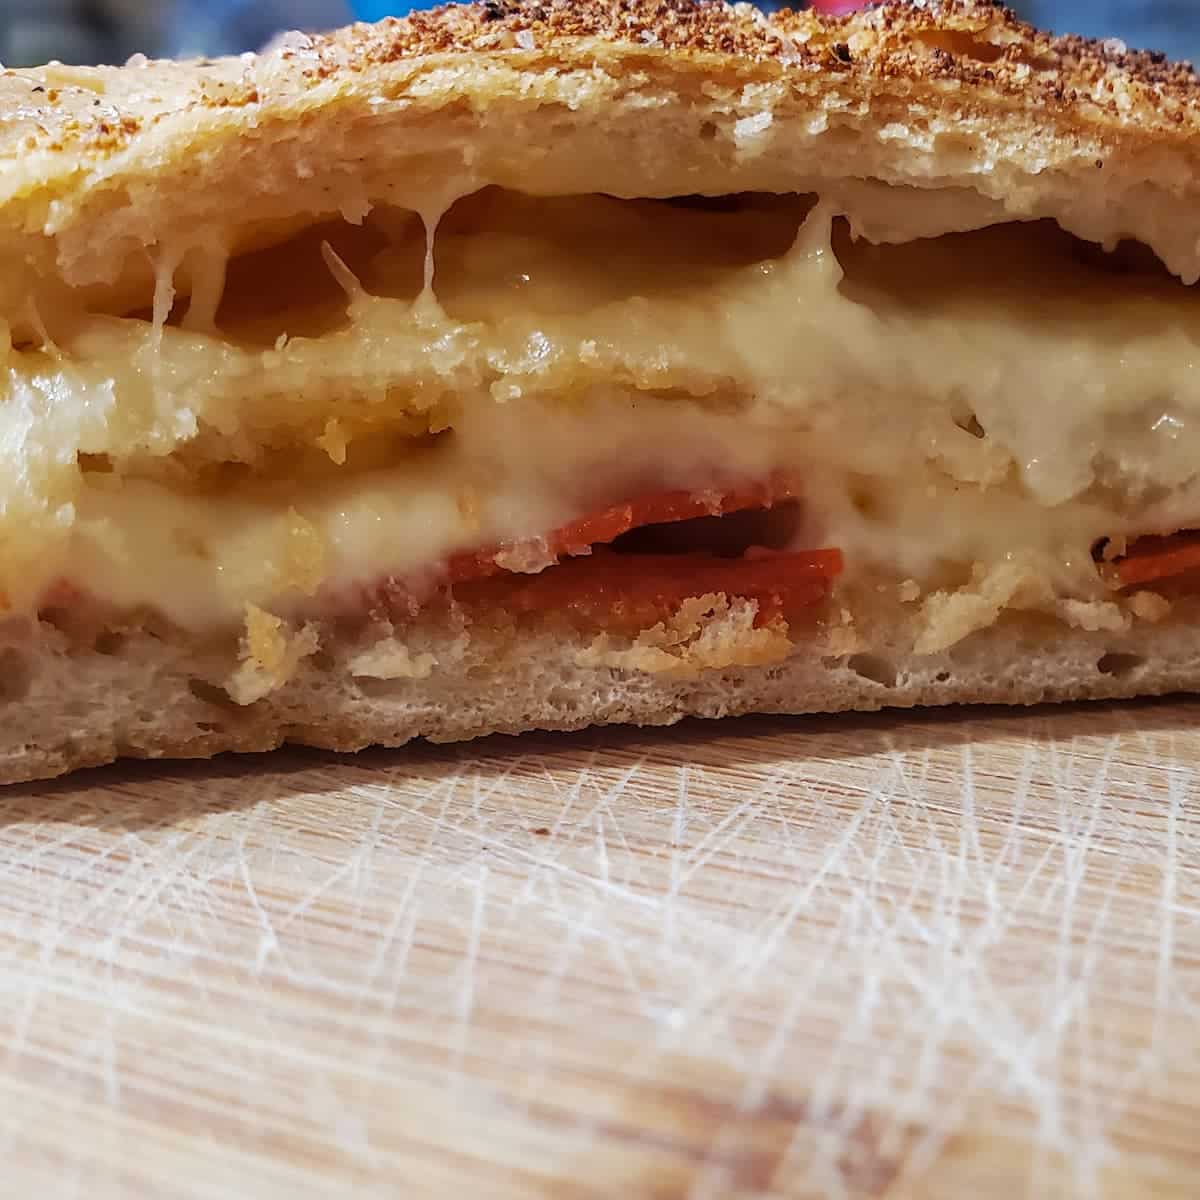 Pepperoni bread fresh from the oven with a spiced top, melty mozzarella cheese, and pepperoni. From Cleveland Cooking